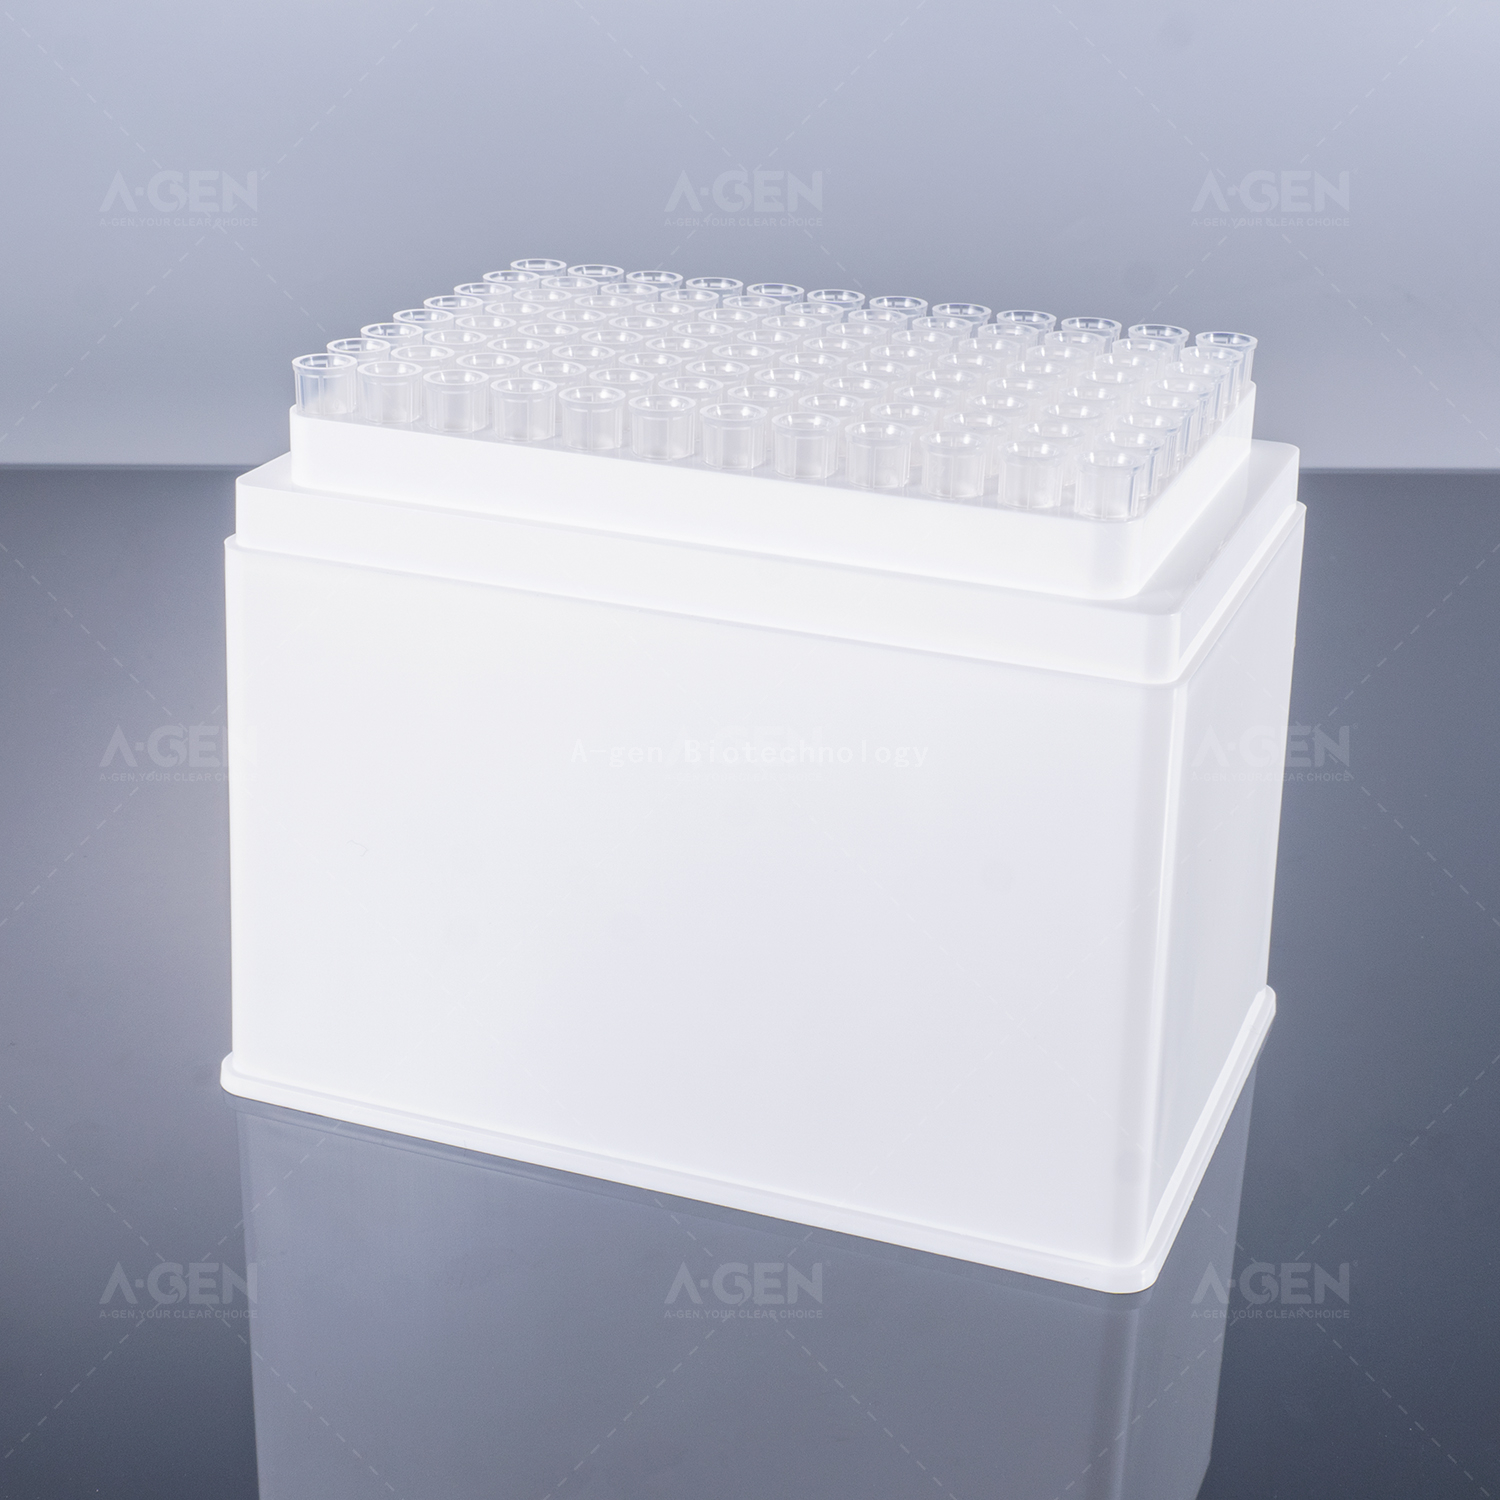 Tecan LiHa 1000μL Transparent PP Pipette Tip (SBS Racked,sterilized) Low Residual With Filter TTF-1000-HSL